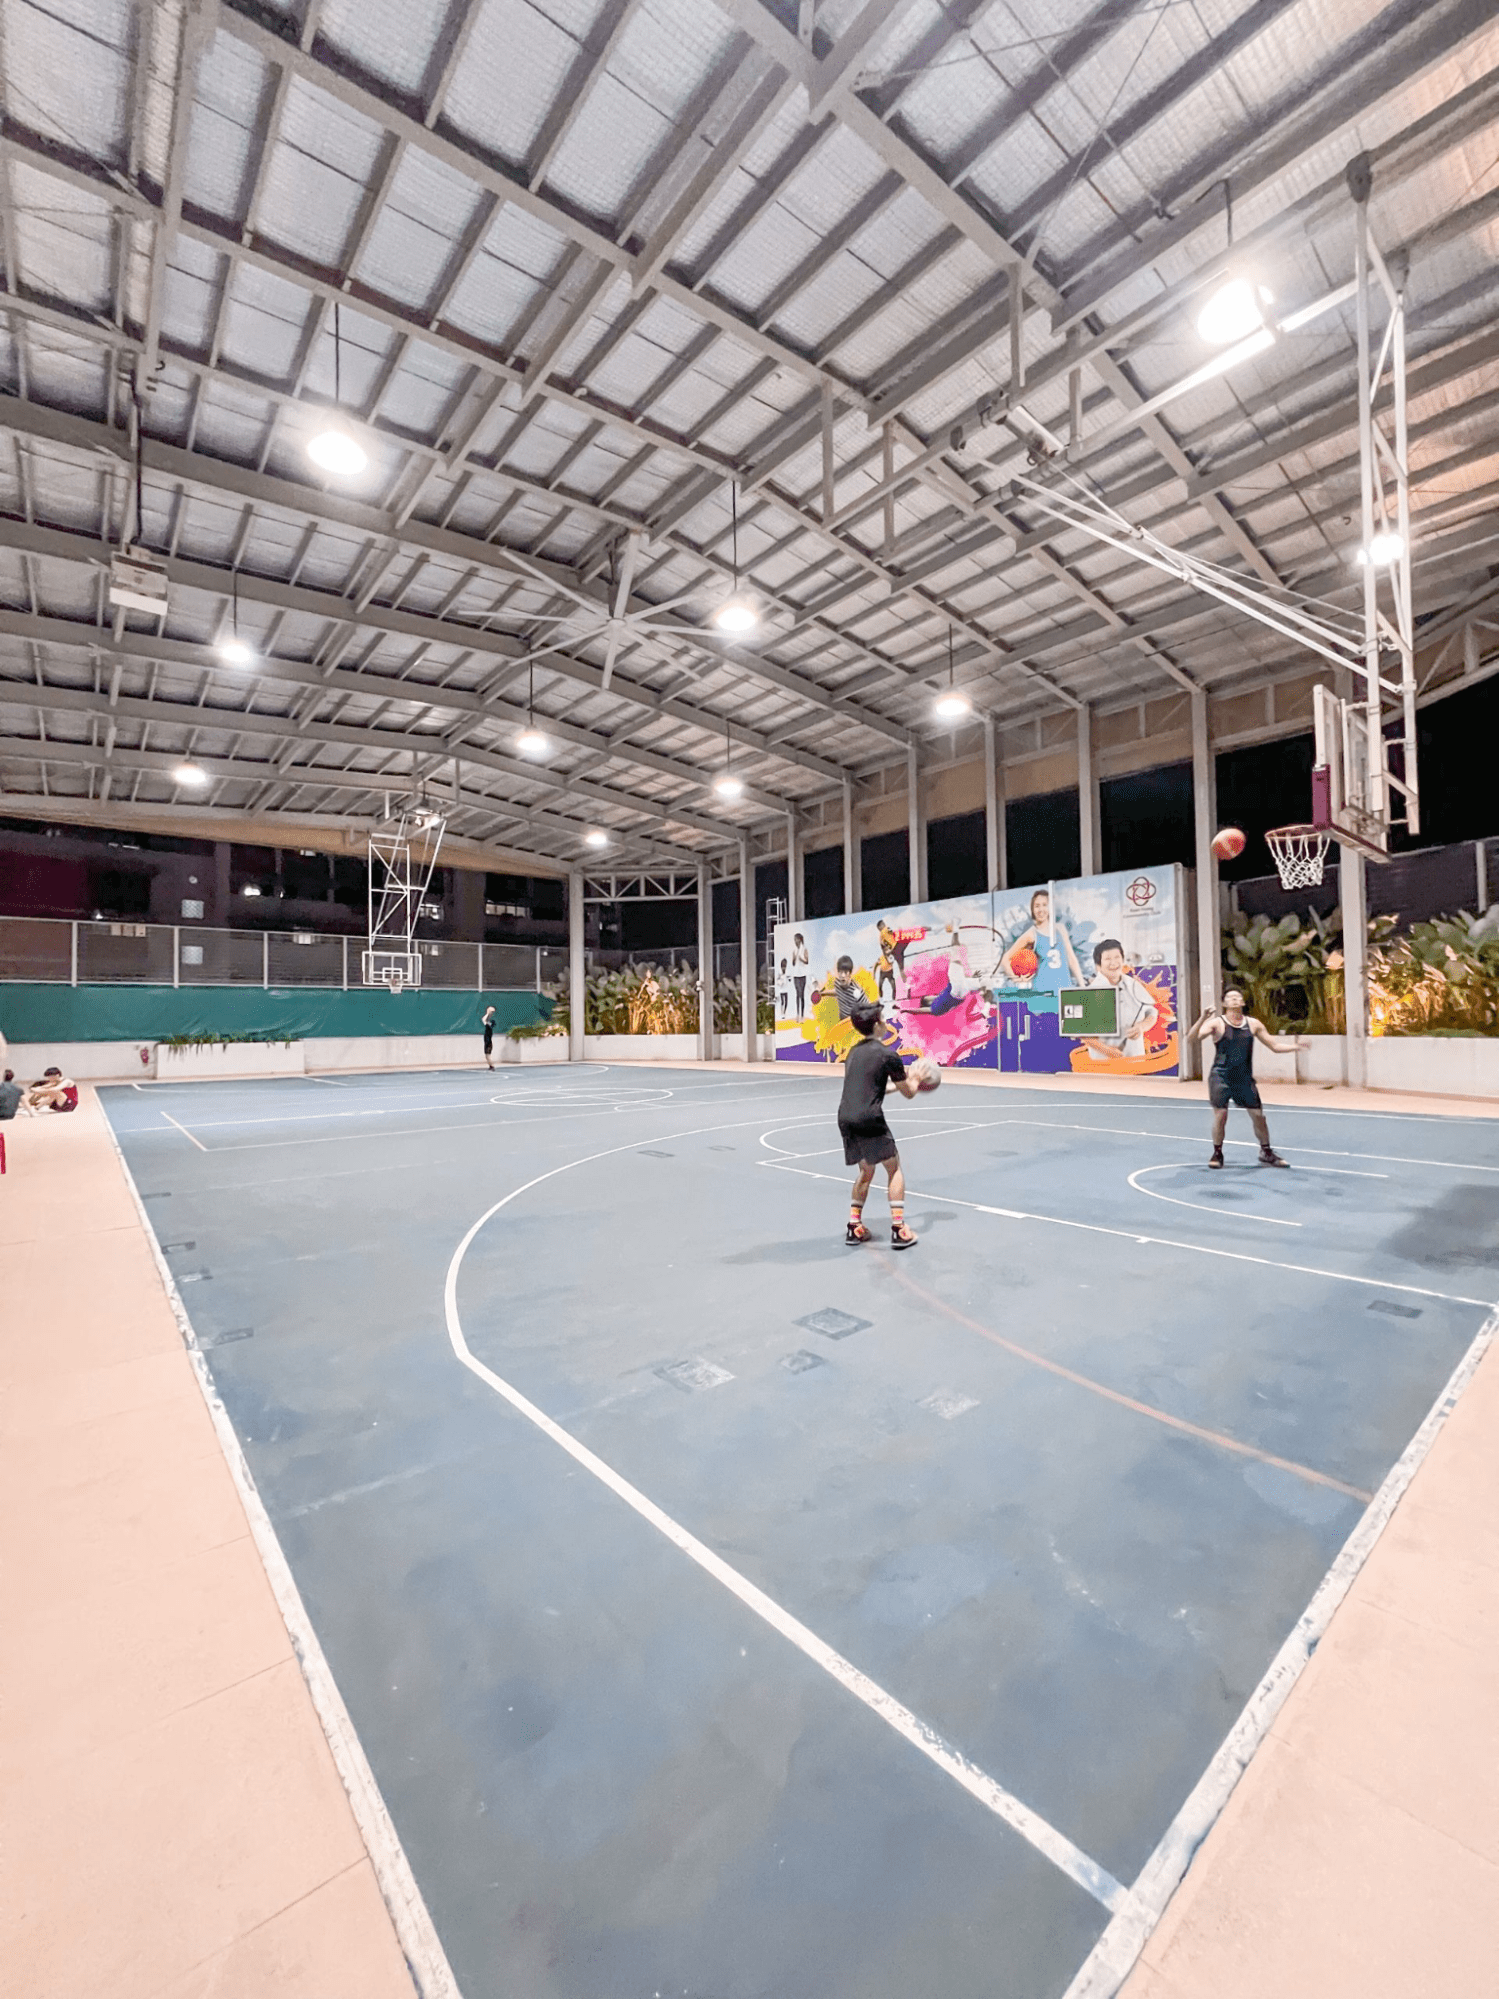 Keat Hong CC - Basketball Courts In Singapore